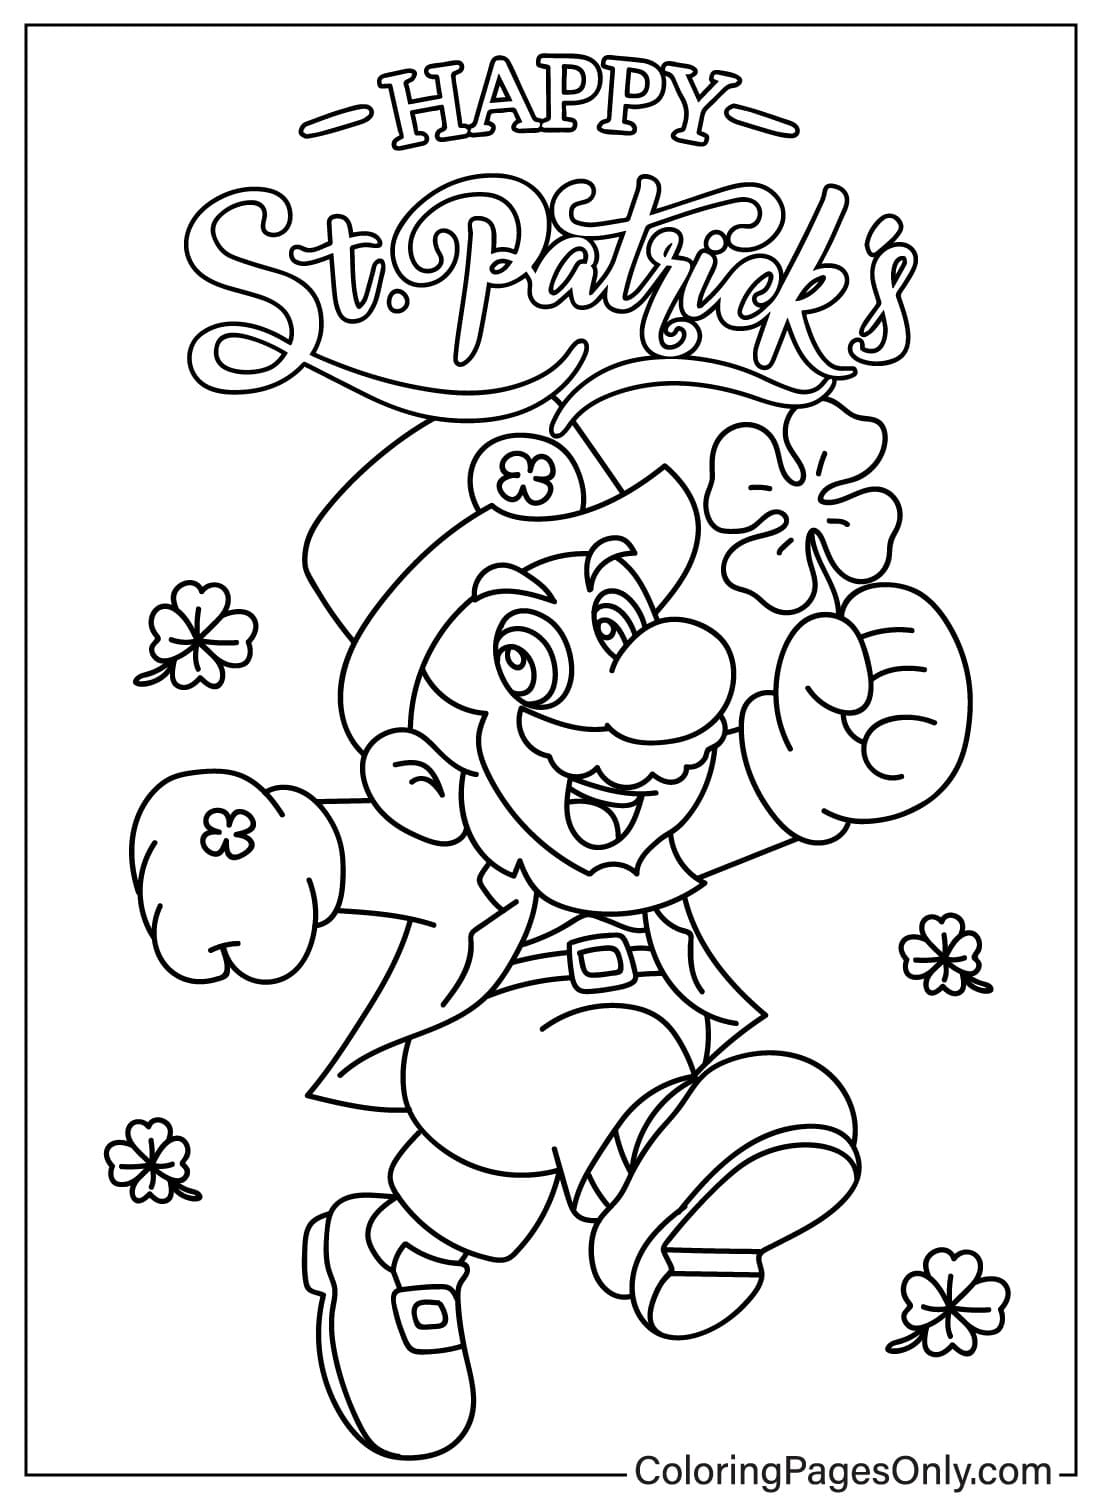 Mario Happy St. Patricks Day Coloring Page from Happy St. Patrick's Day